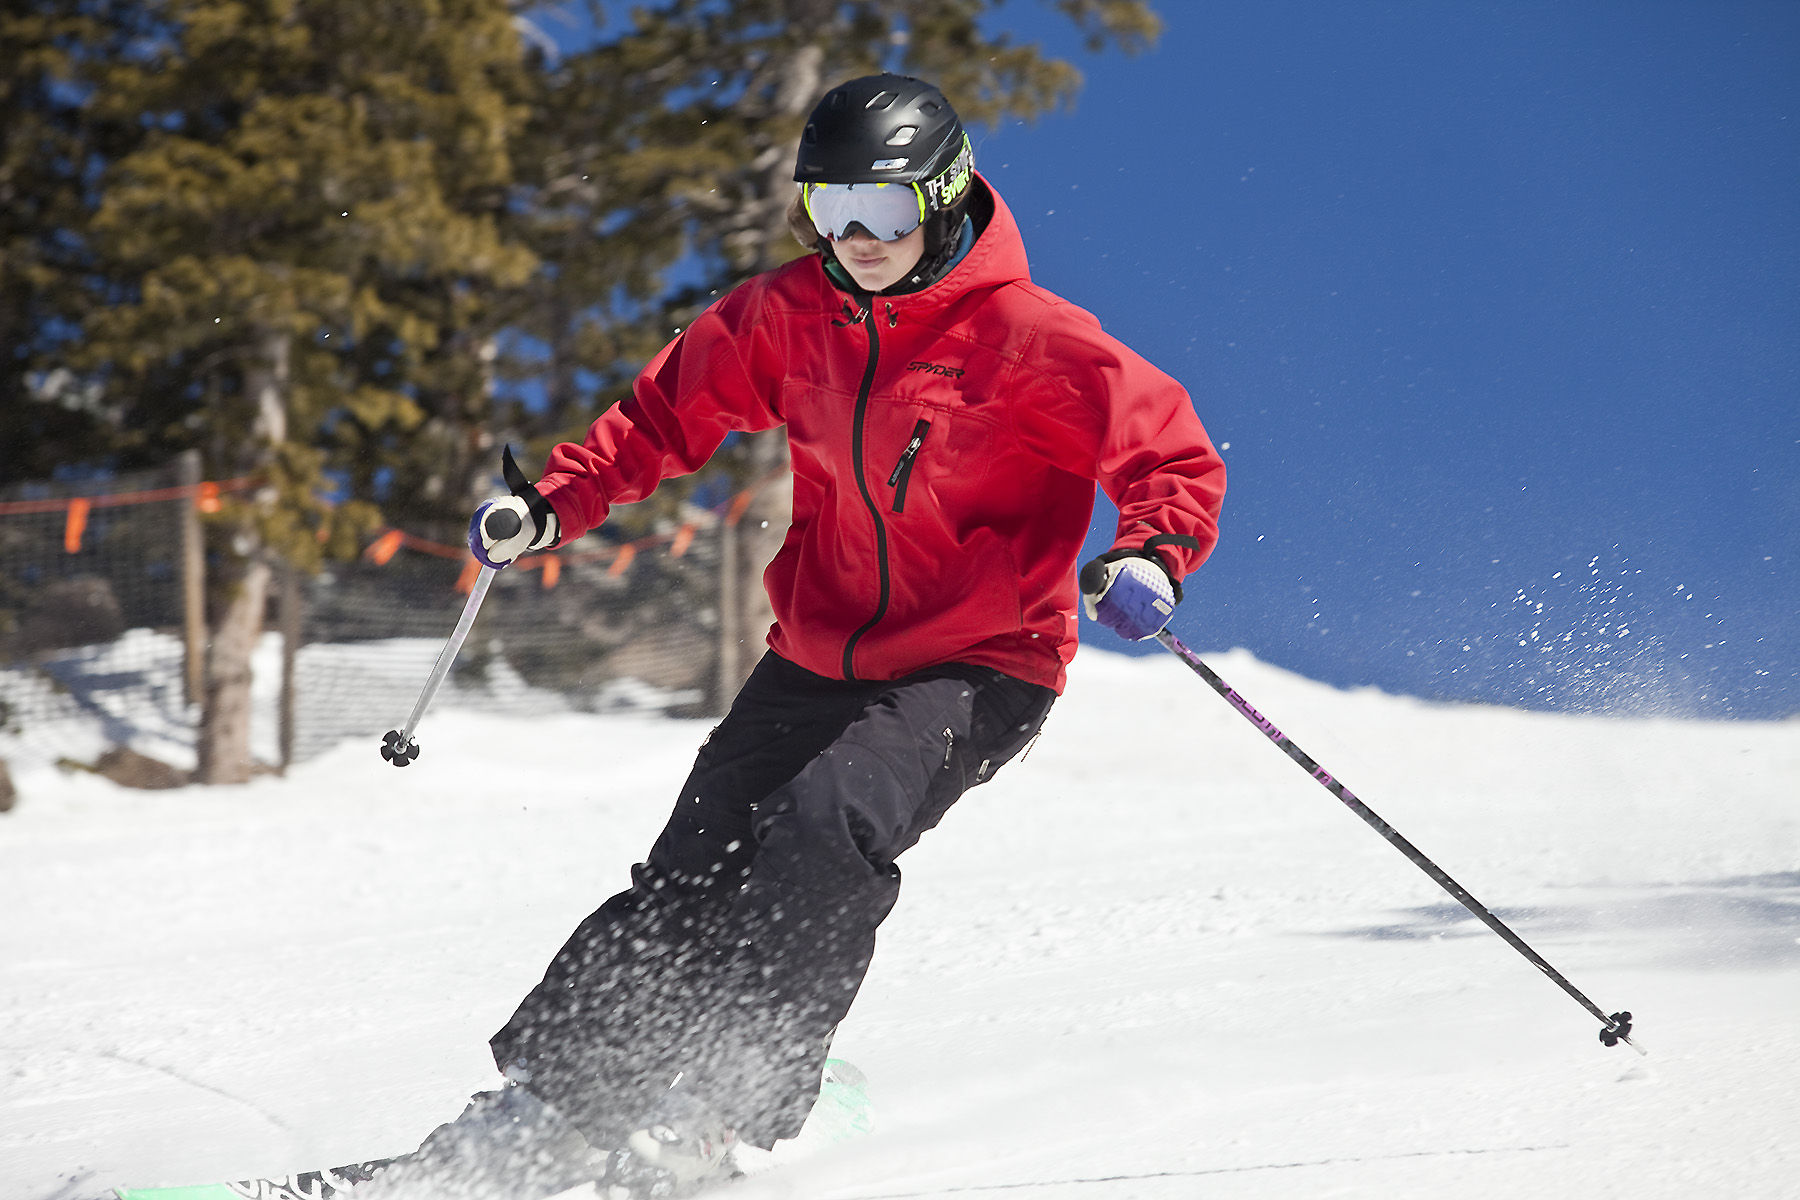 Calf Pain in Skiers and Boarders - IOsteopath